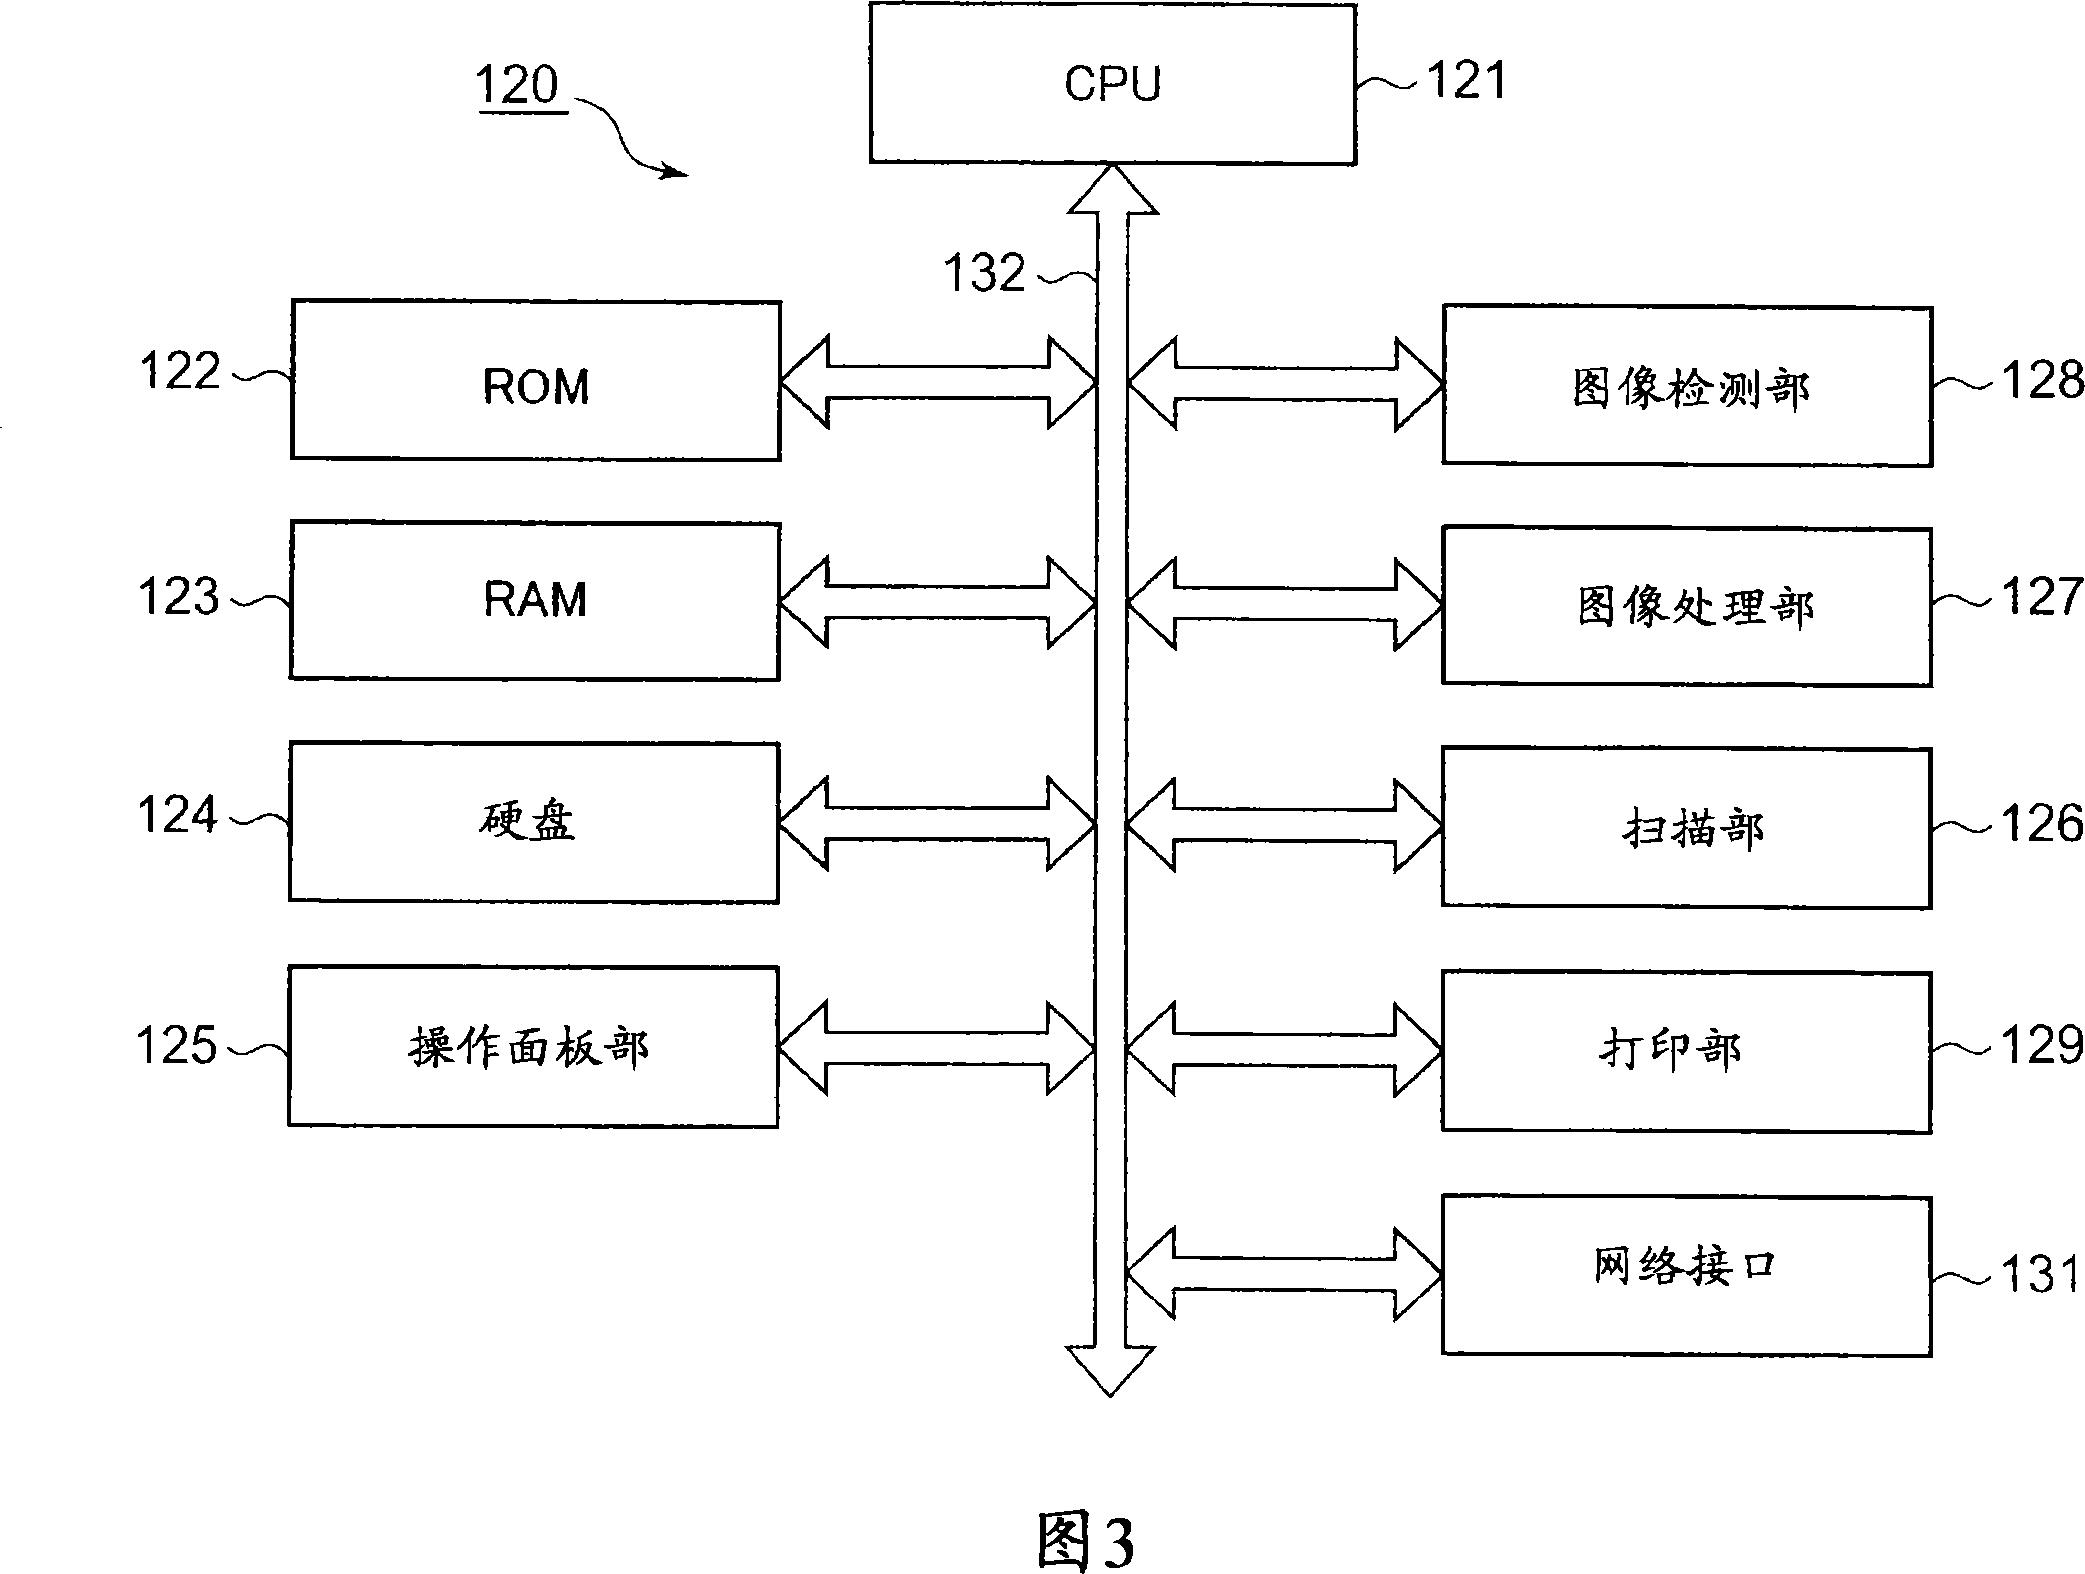 Image forming processing apparatus and image forming processing method